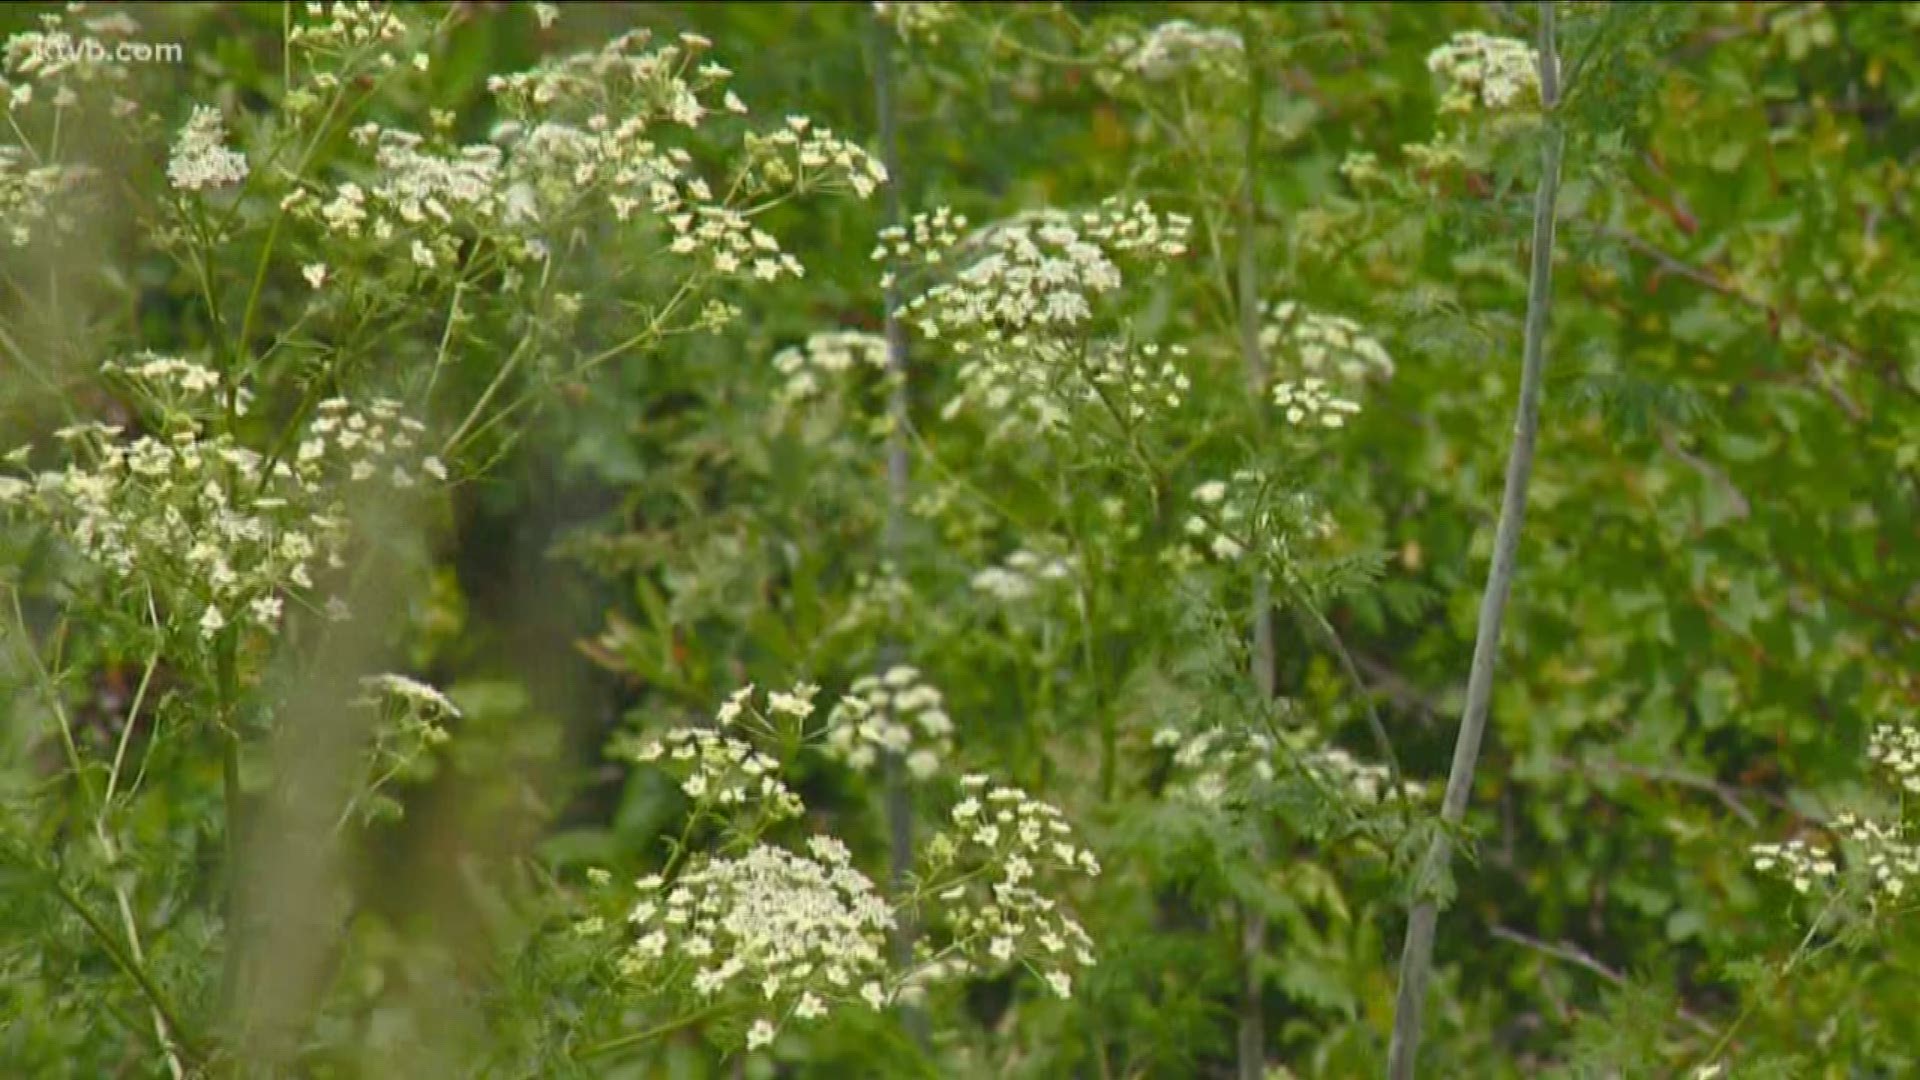 If you are headed outdoors you need to be on the lookout for this deadly plant.